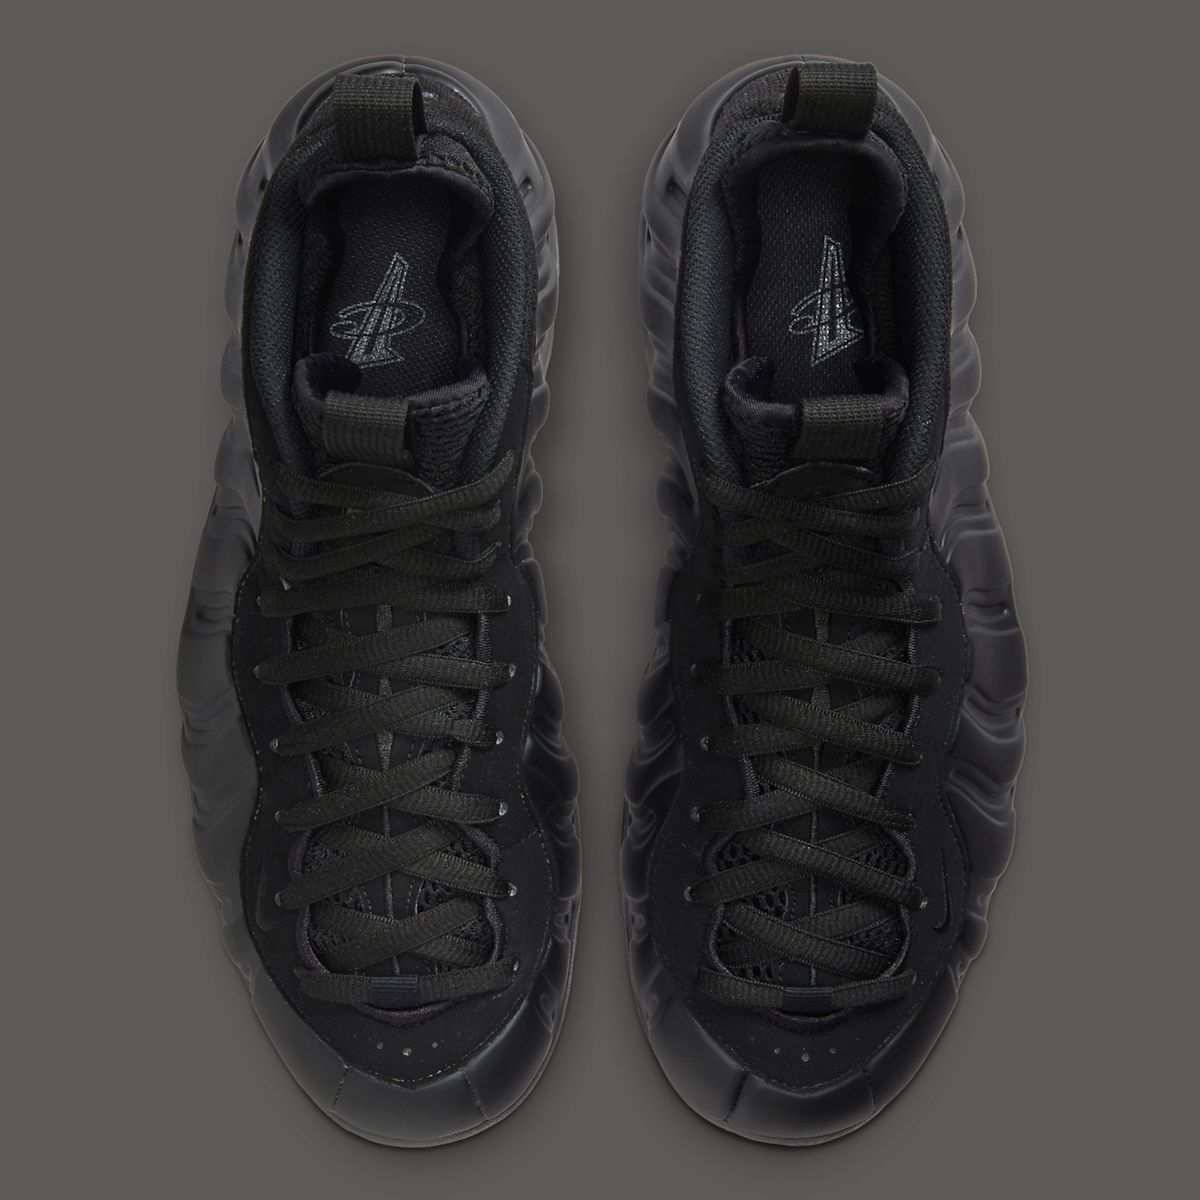 Nike Air Foamposite One Anthracite Fd5855 001 1